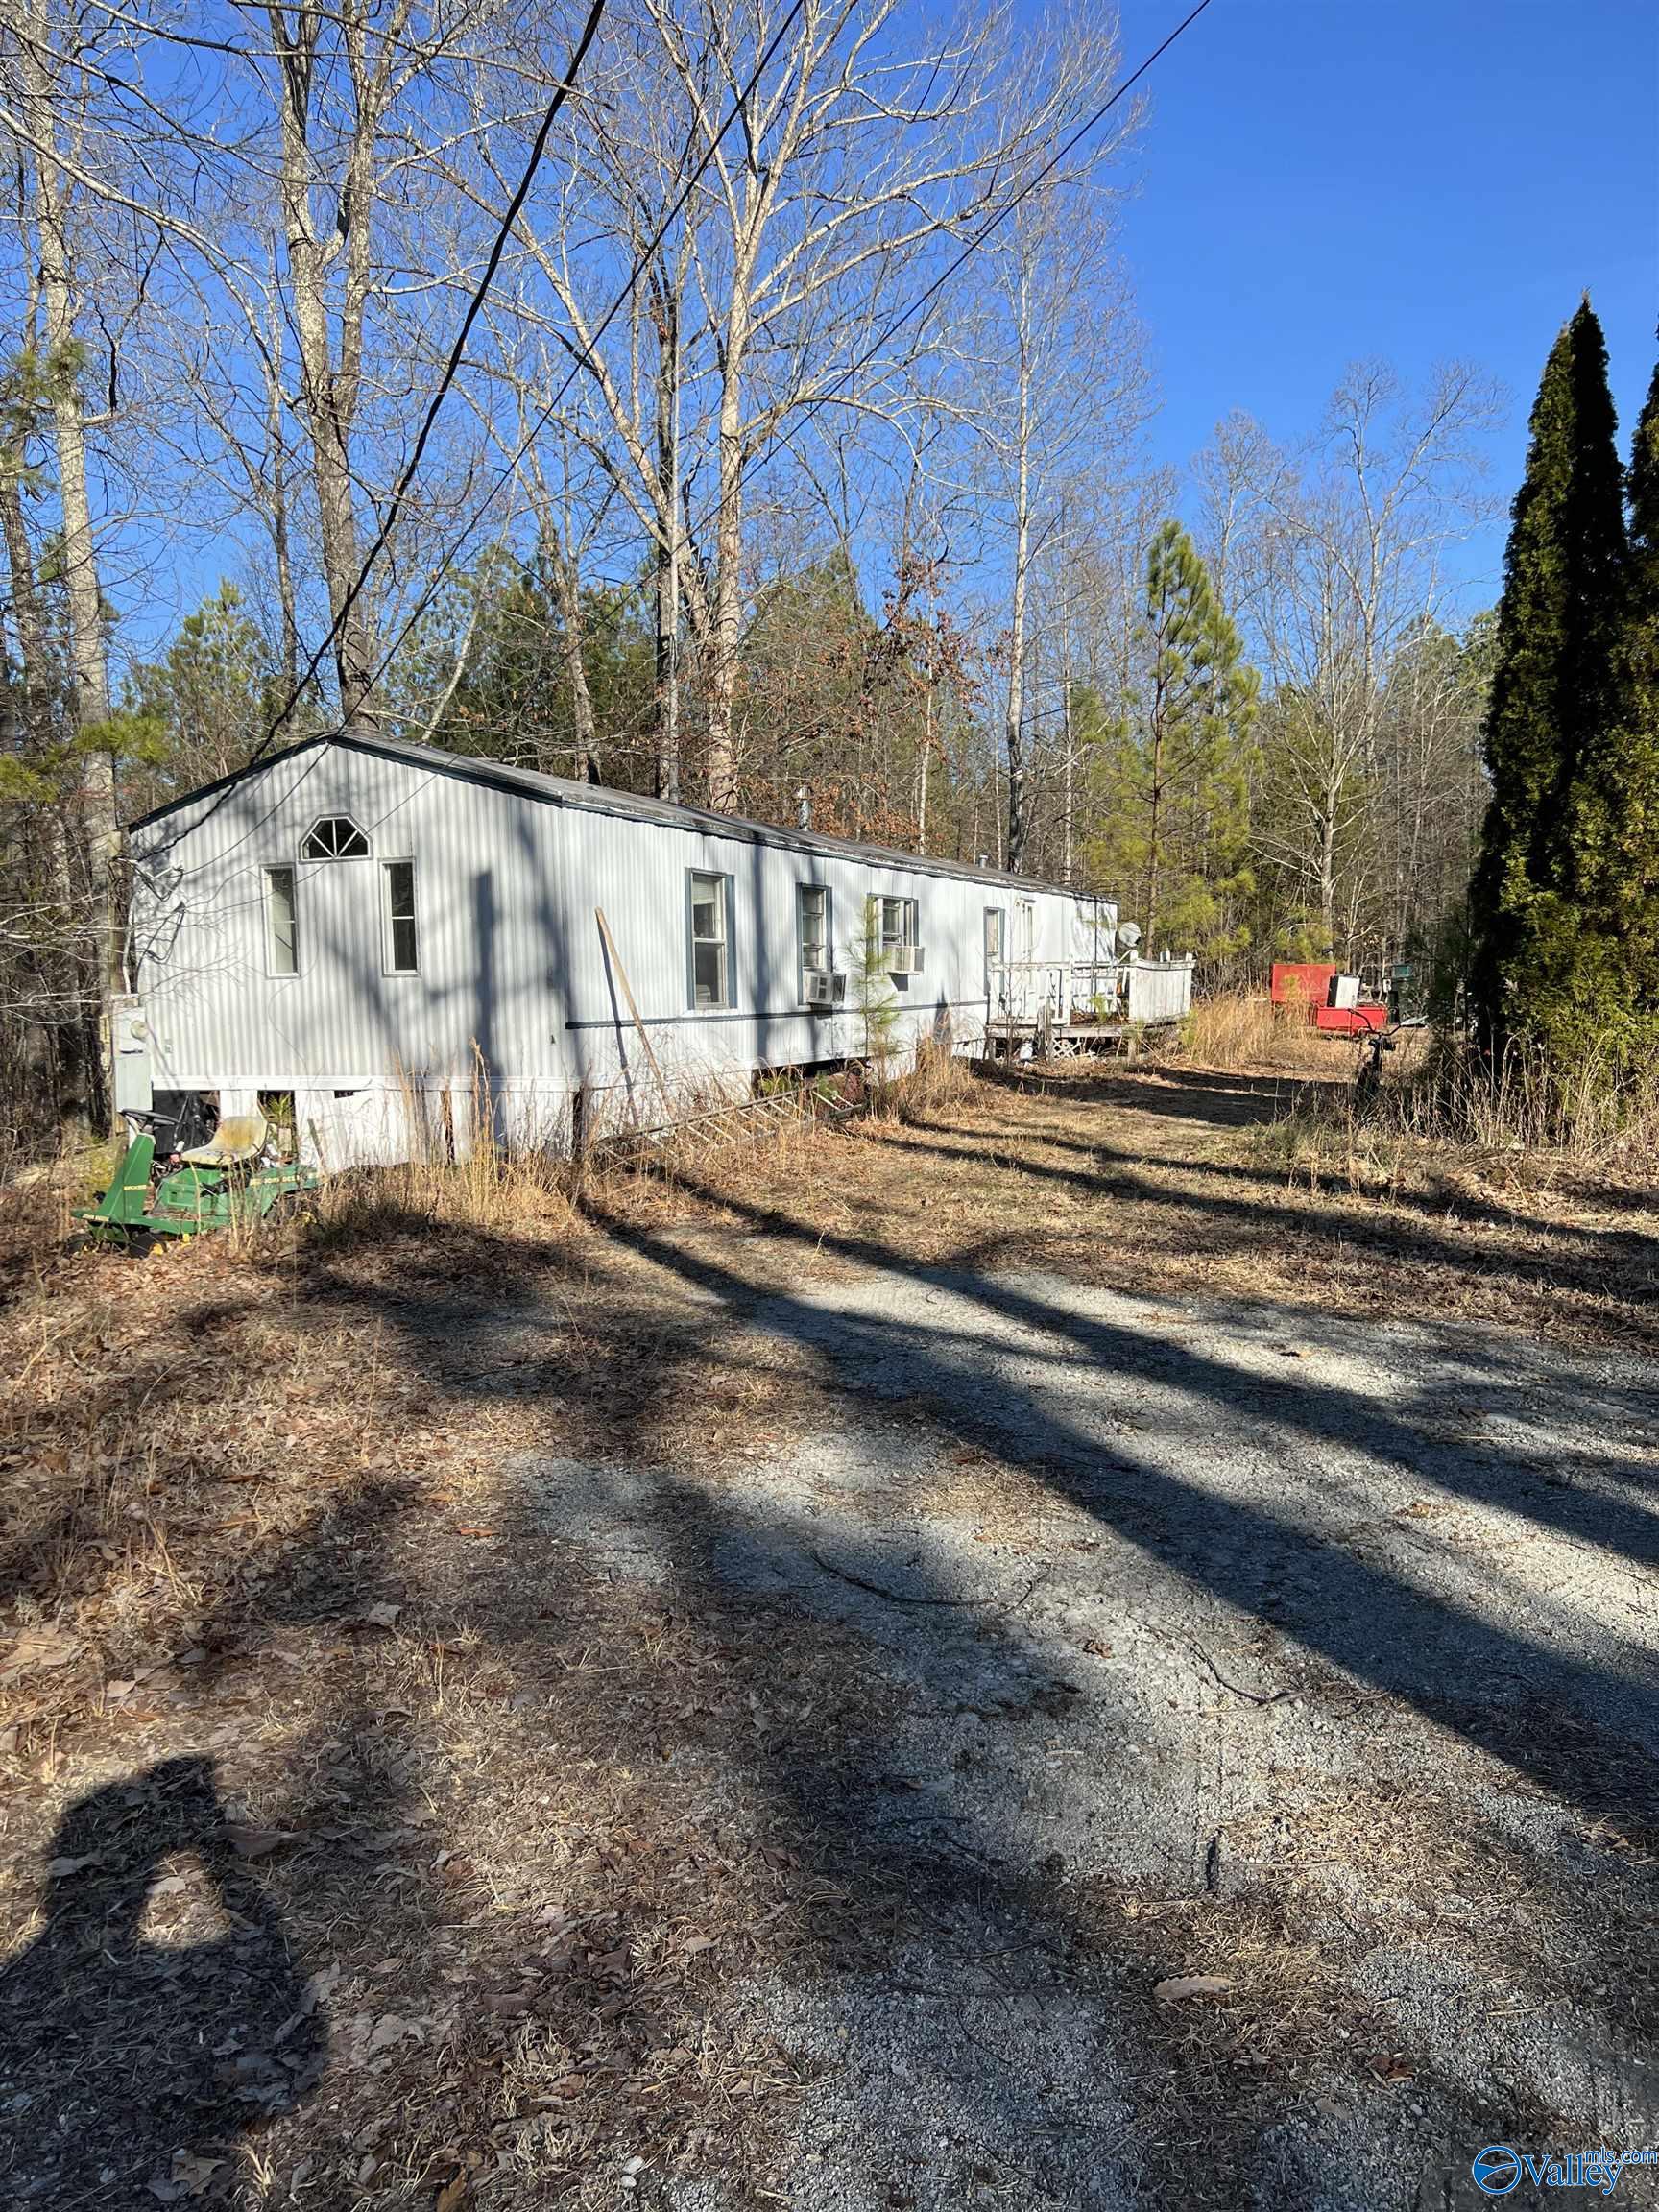 Property: 10987 Fords Valley Road,Hokes Bluff, AL